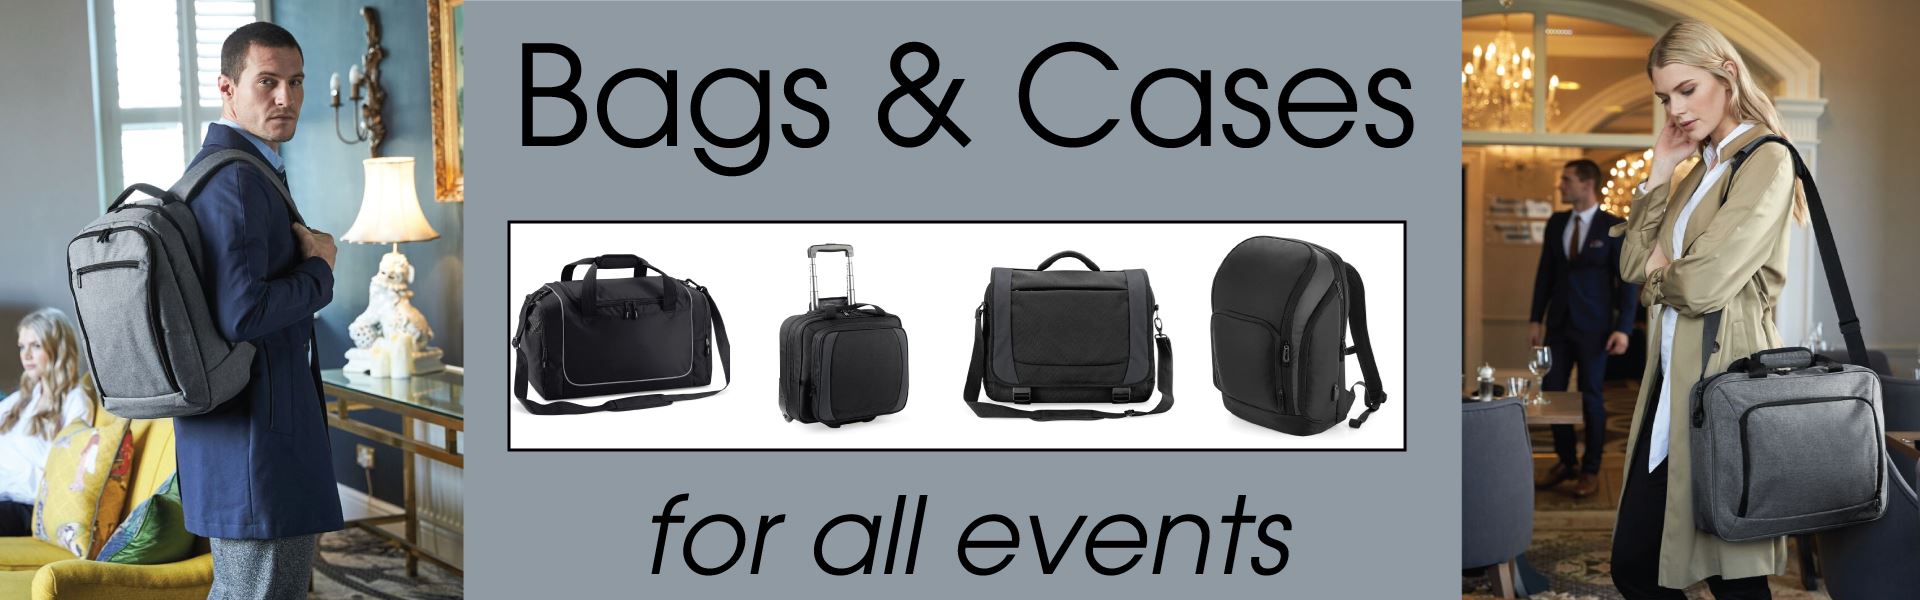 bags-cases